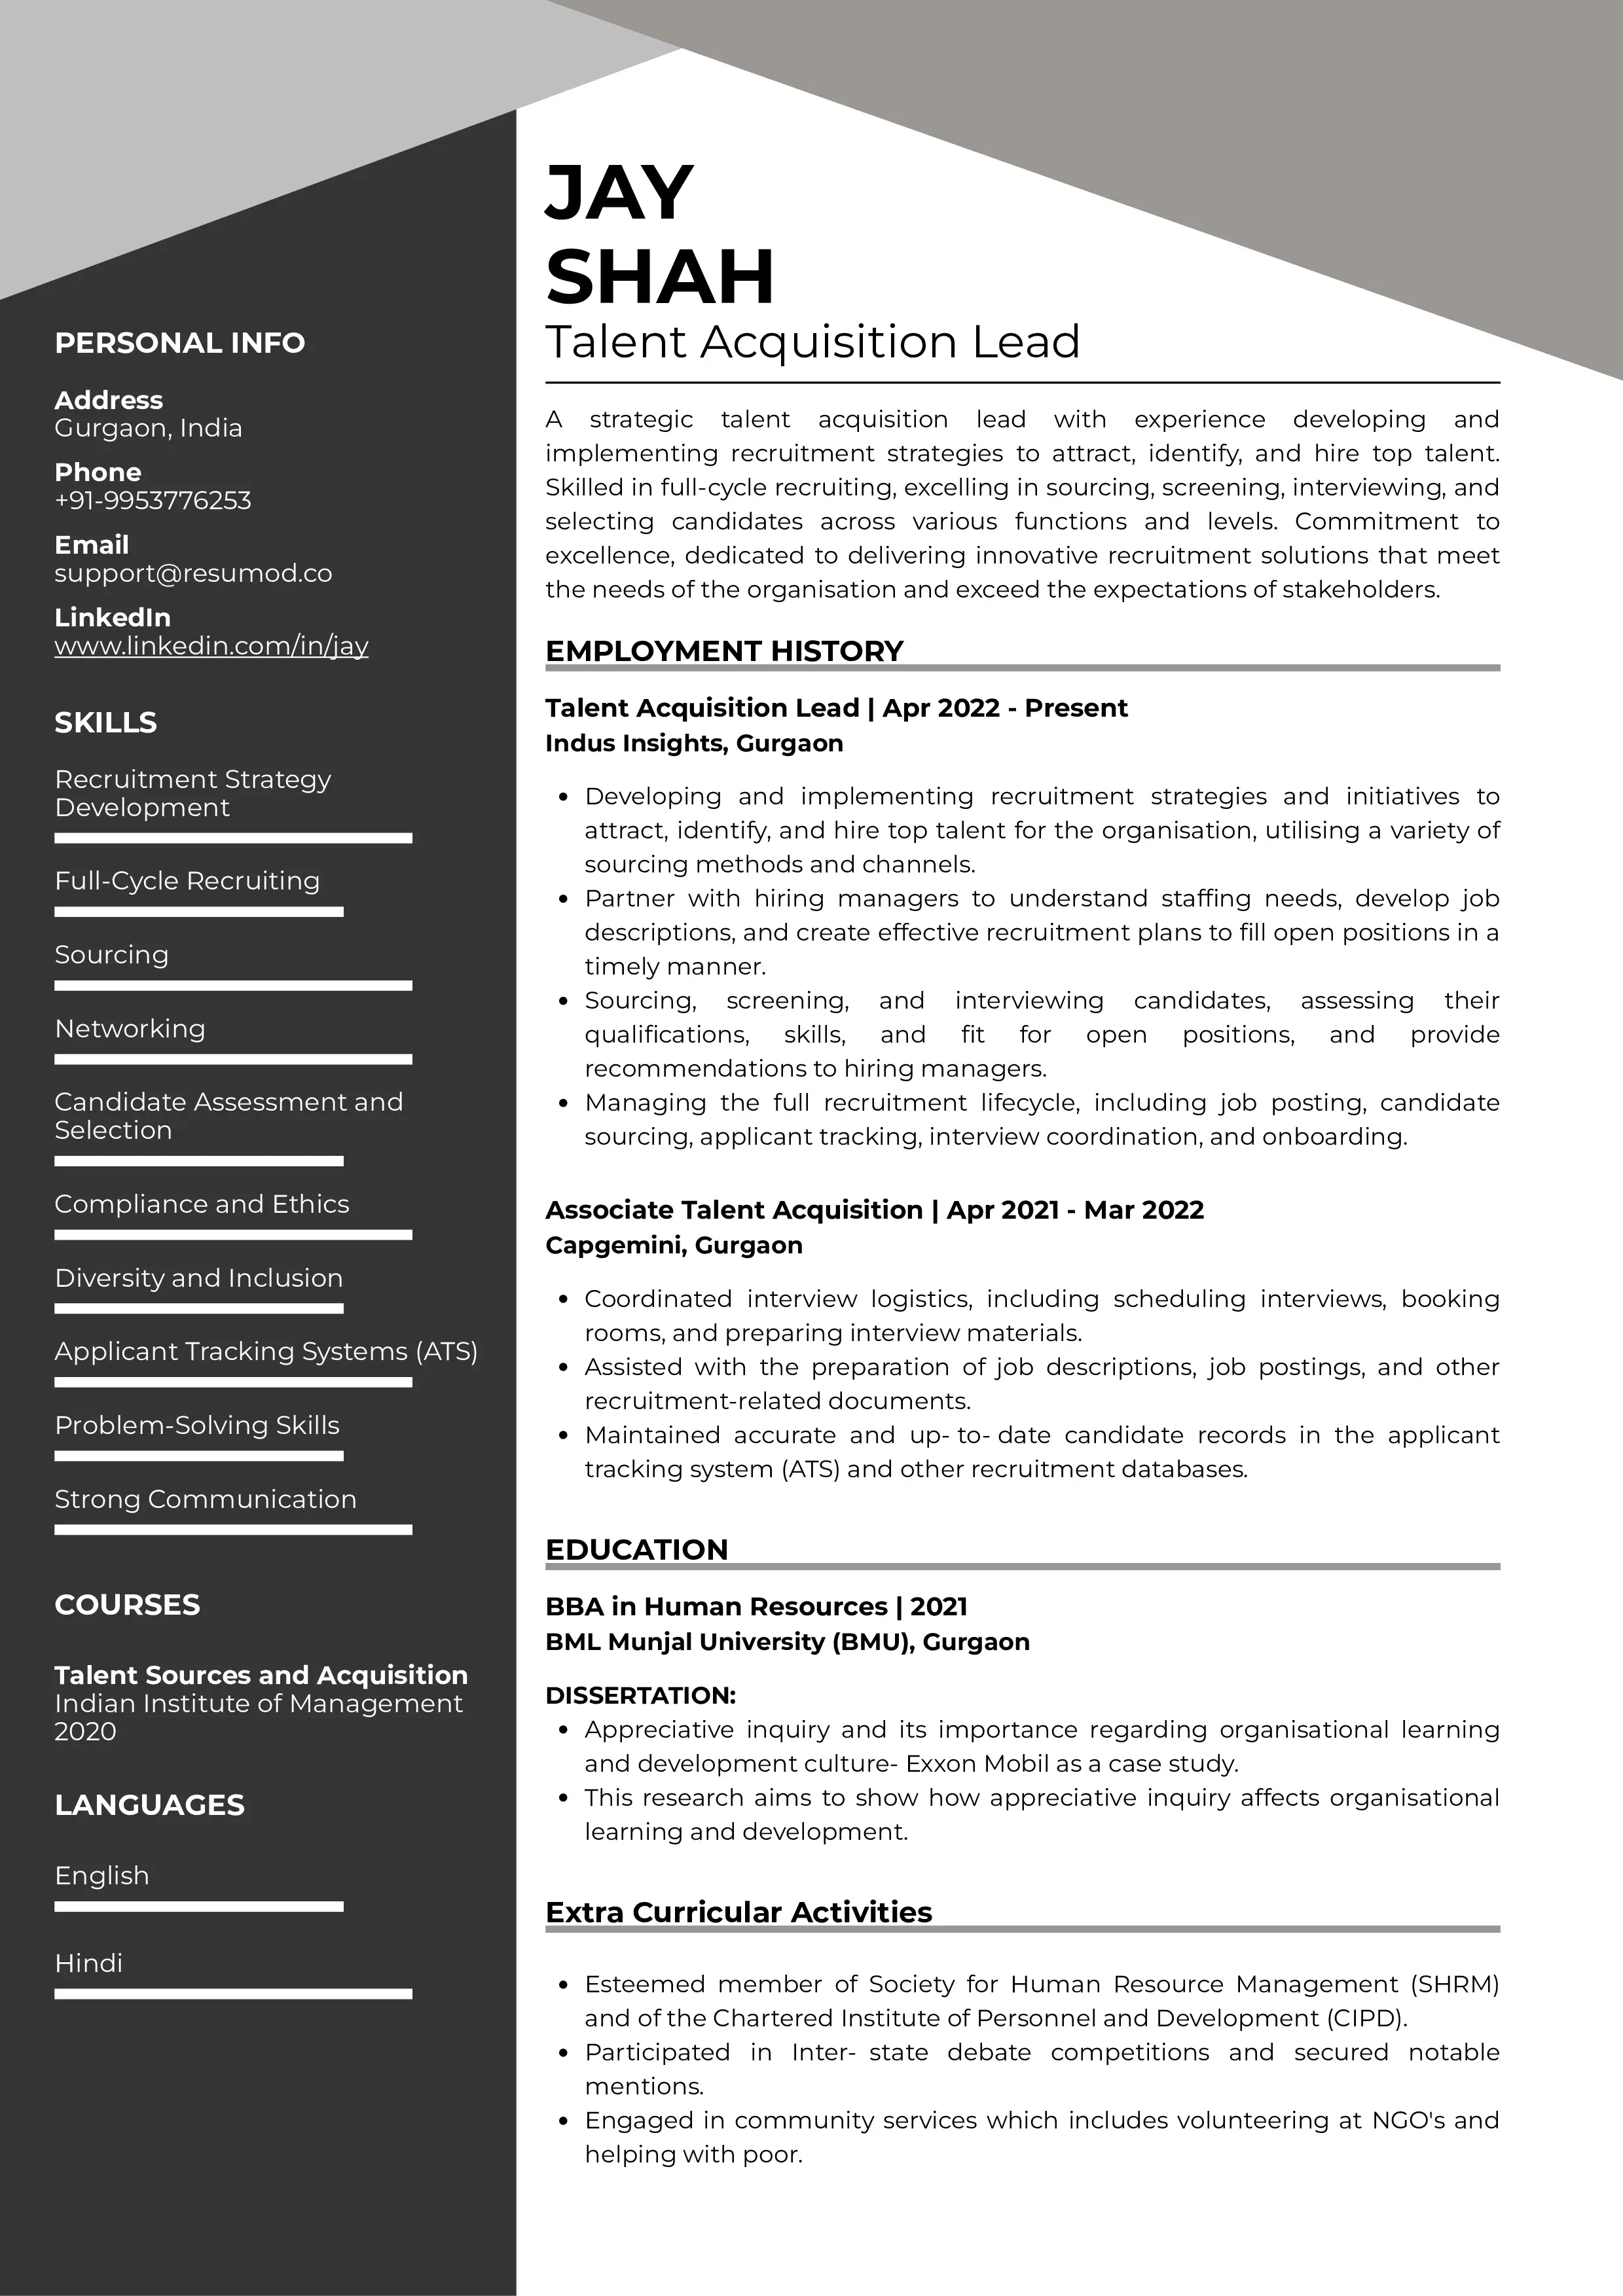 Sample Resume of Talent Acquisition Lead | Free Resume Templates & Samples on Resumod.co